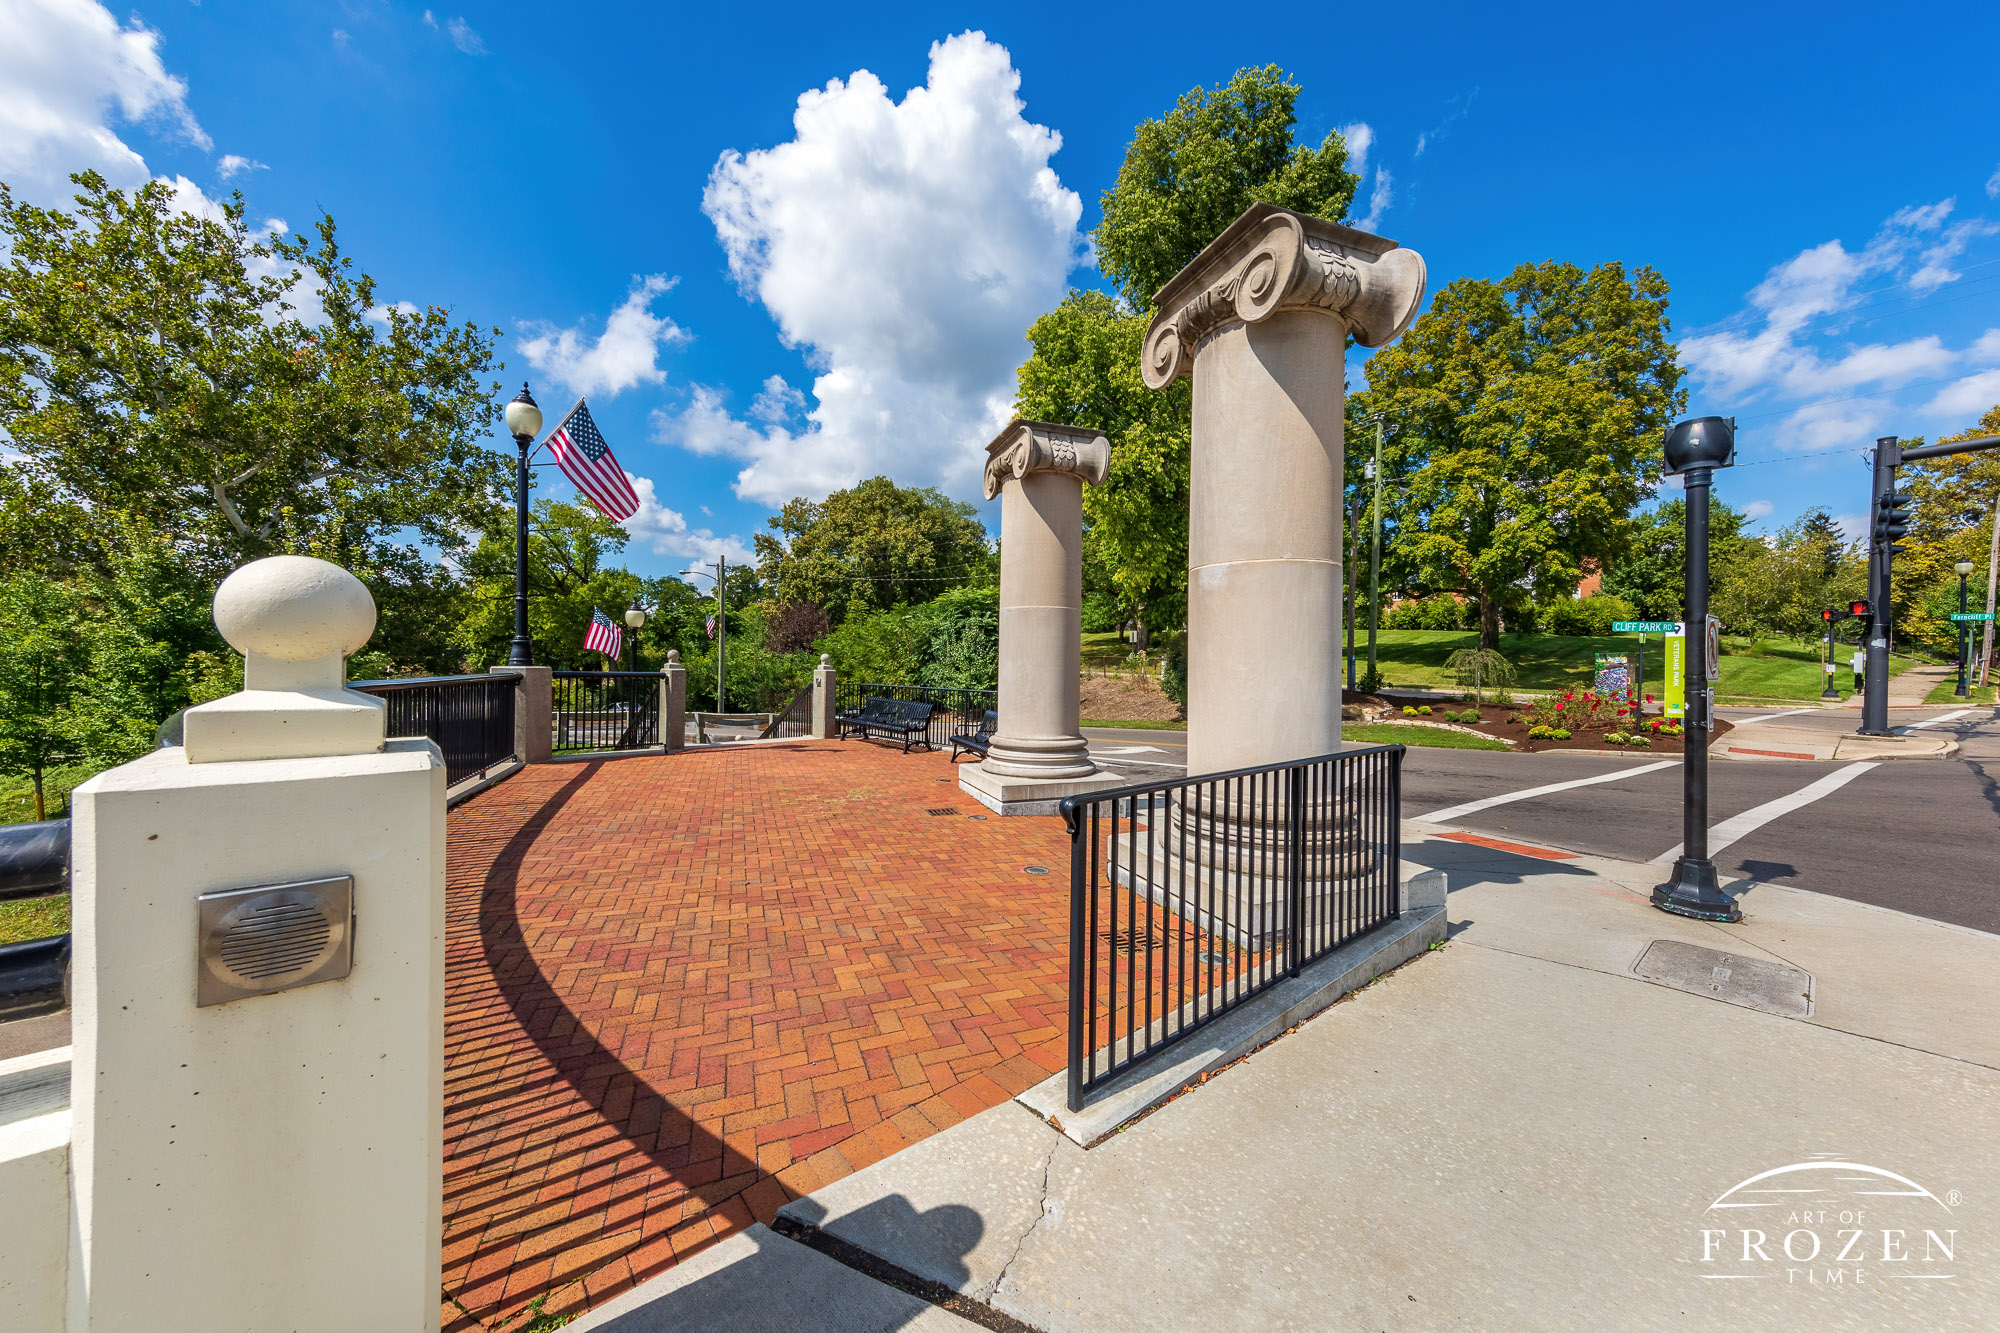 A pair of smooth columns with decorative scroll tops stand on a corner in Springfield Ohio marking the entrance to the Veterans Park Memorial.